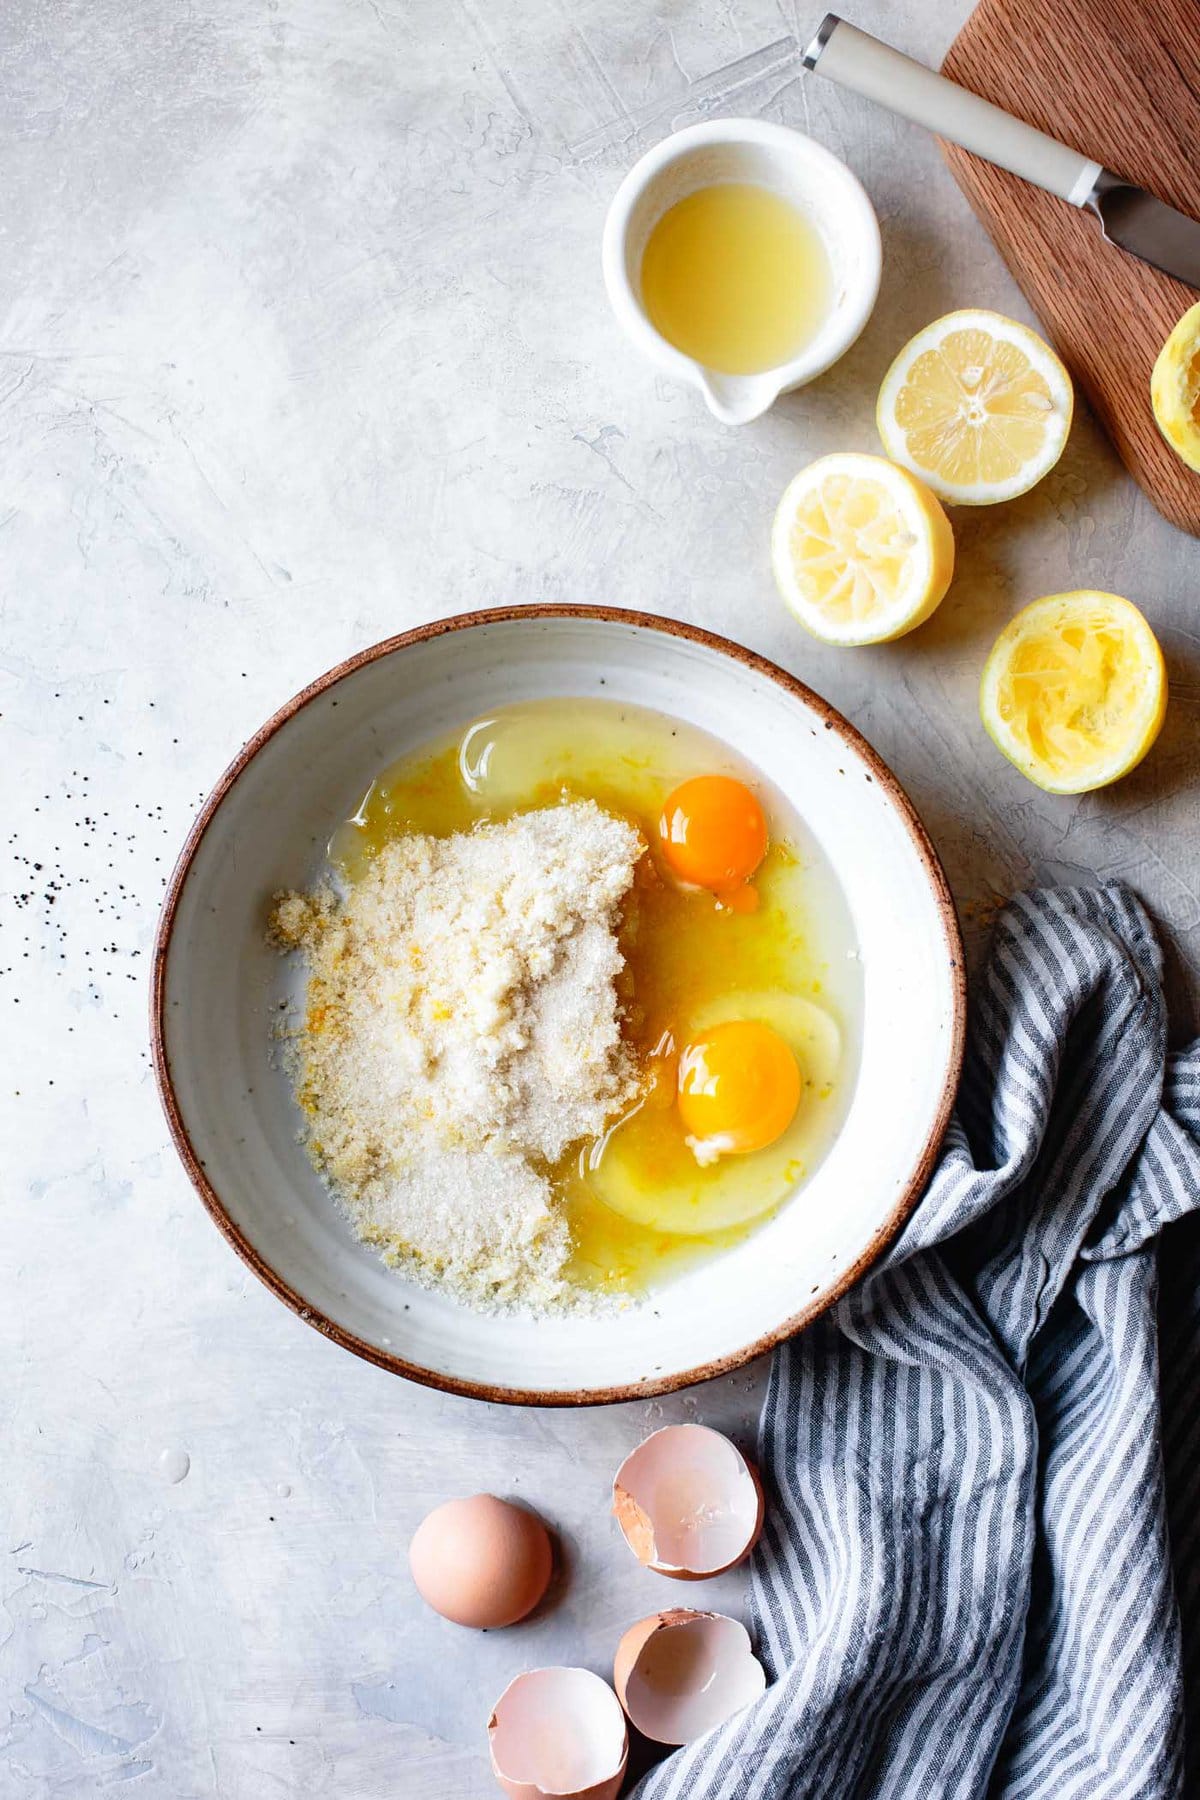 The eggs and lemon sugar are side by side in a bowl